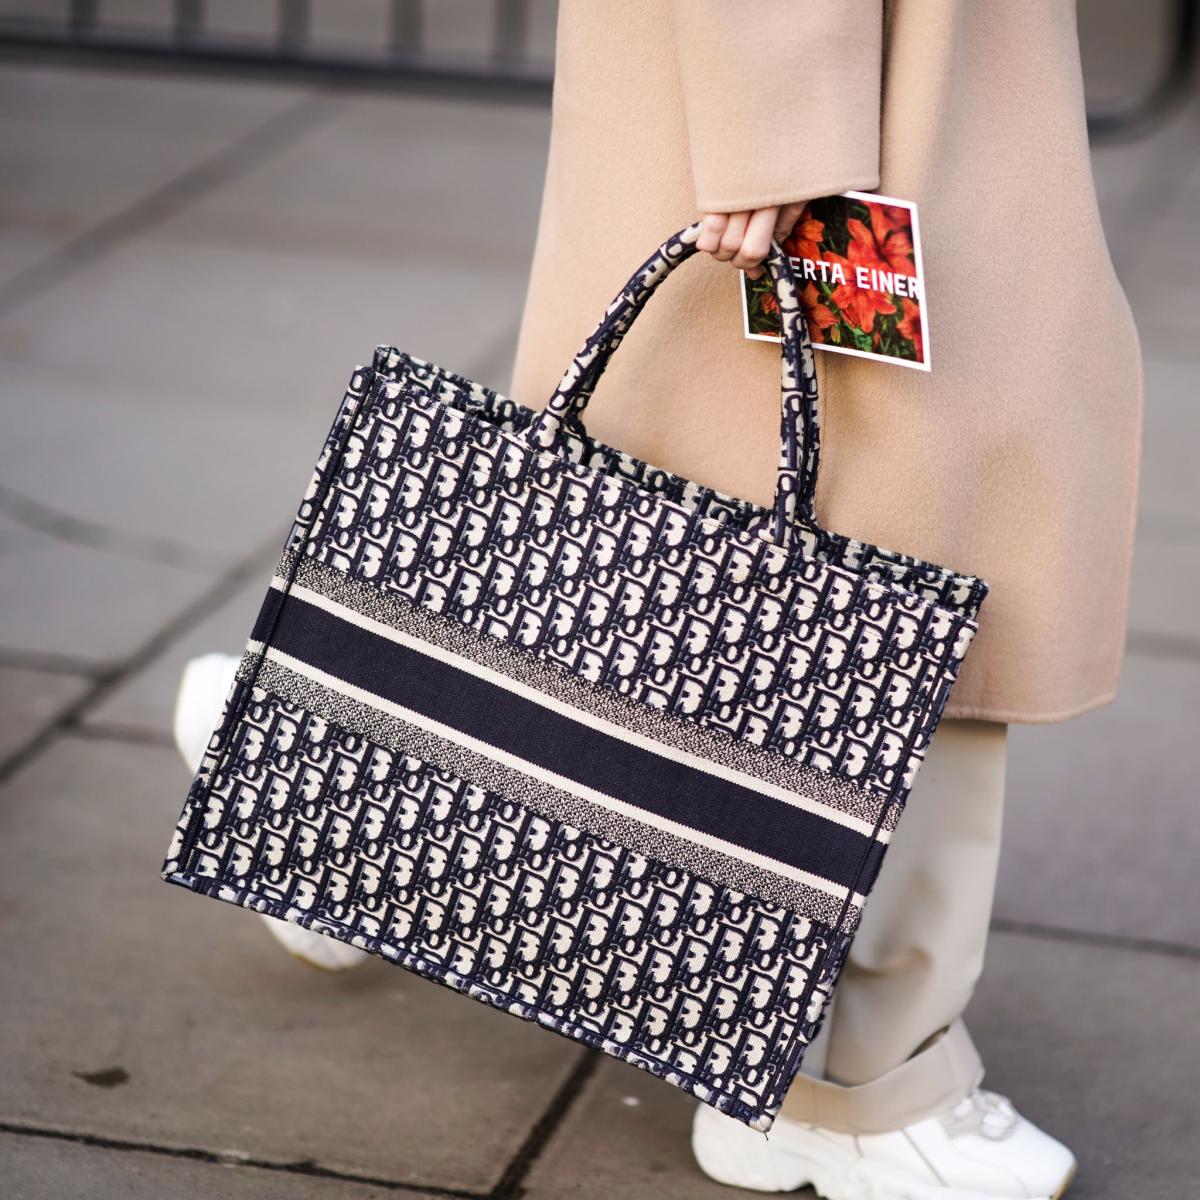 11 High Quality Designer Totes That Can Fit a Laptop